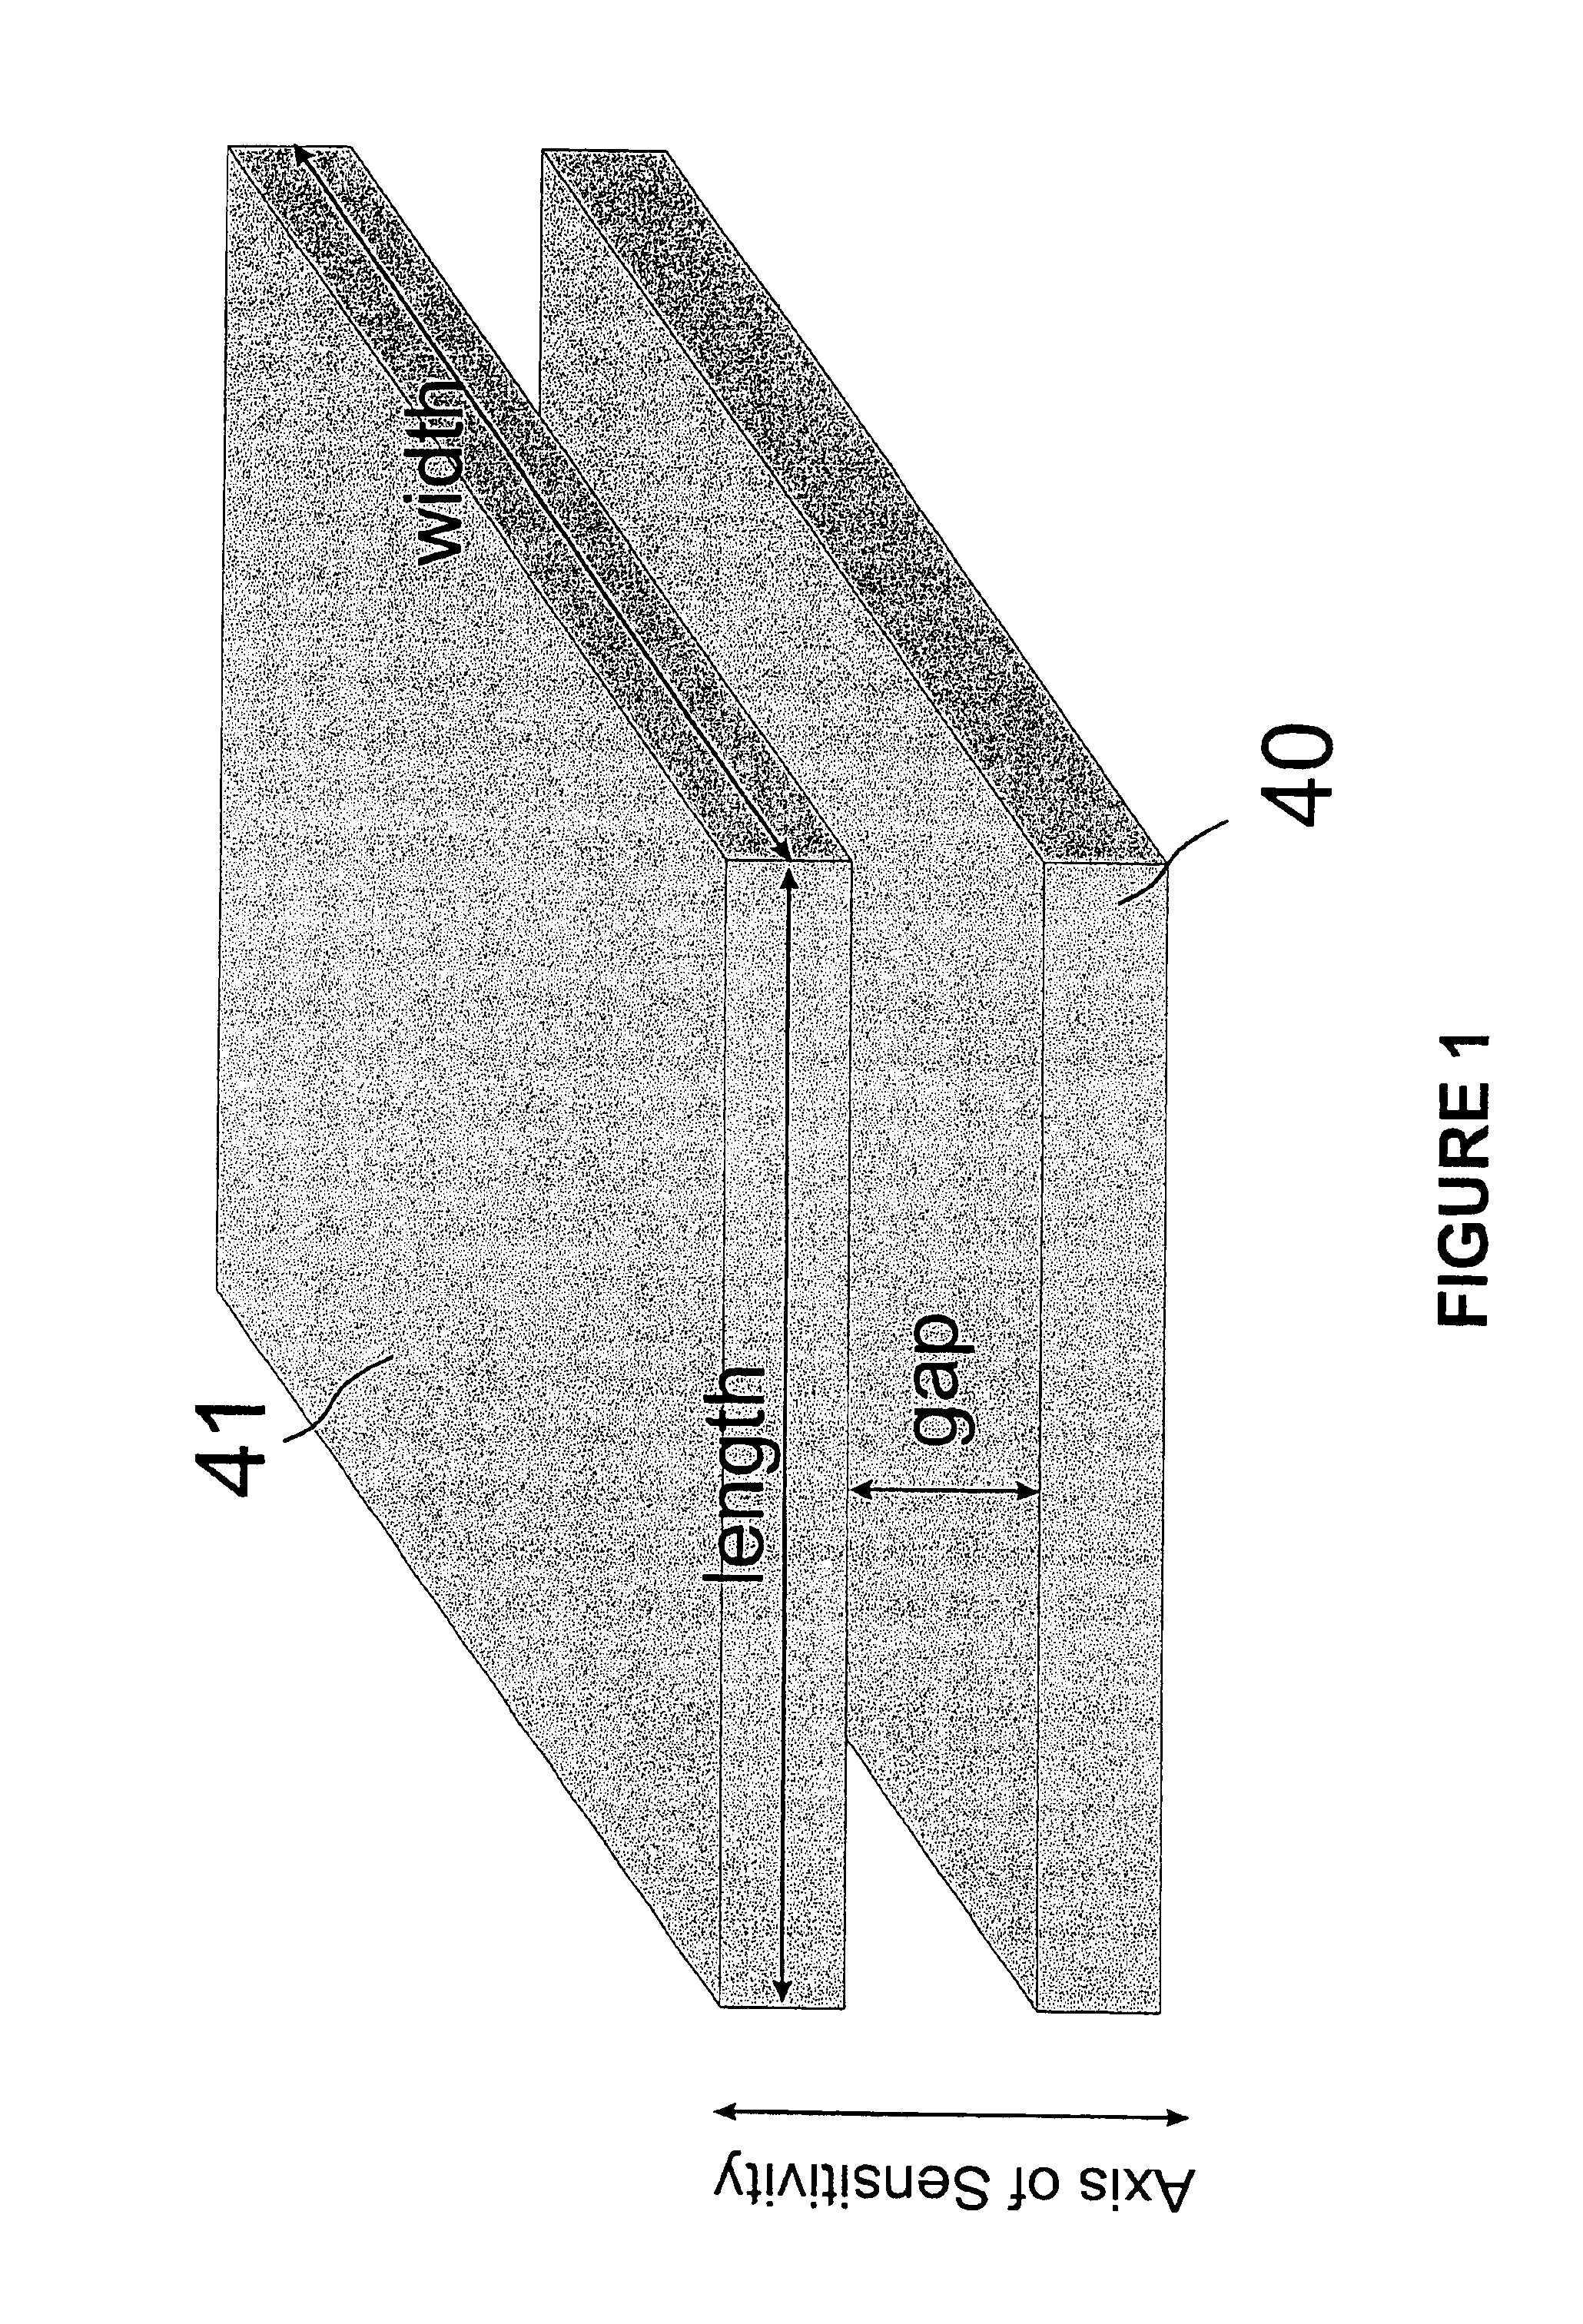 Position sensing with improved linearity